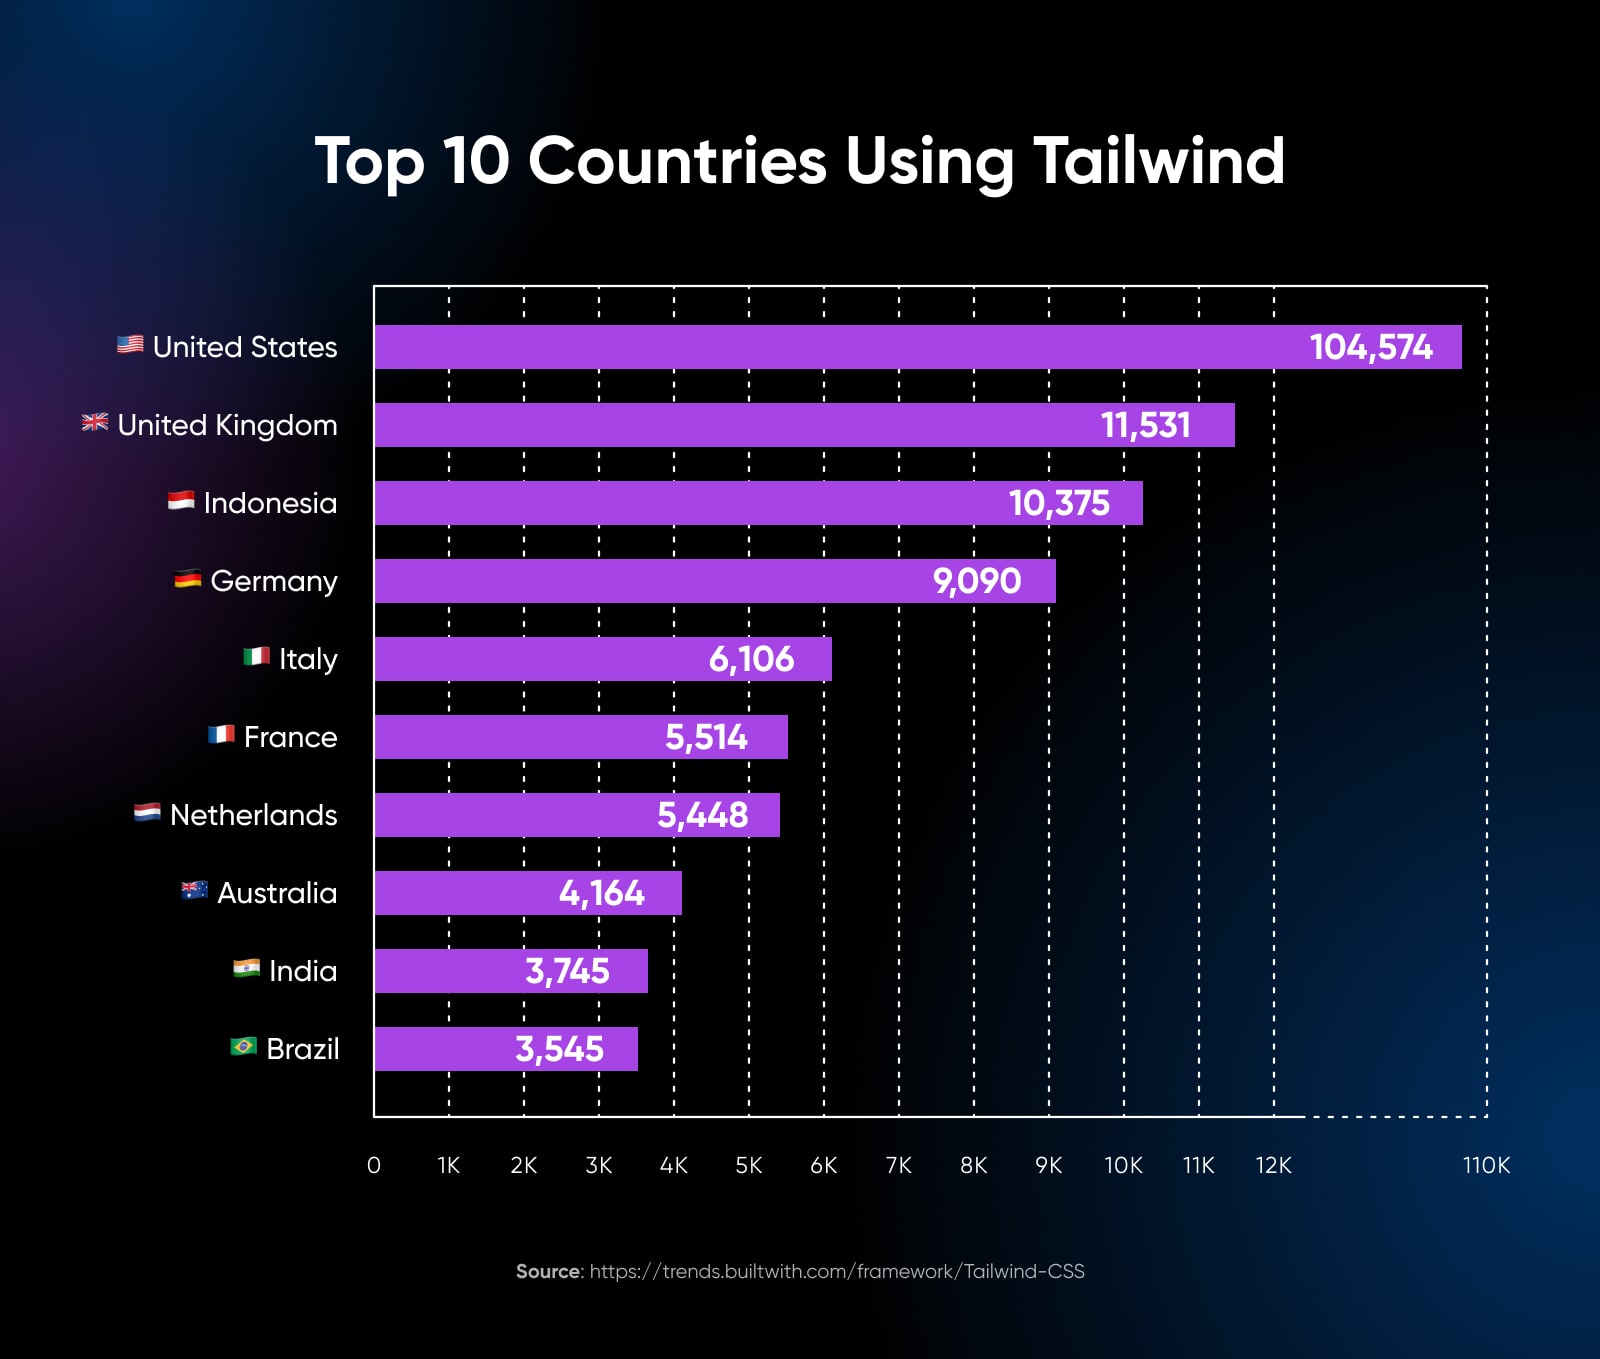 Statistics of Top 10 Countries Using Tailwind in a chart showing USA at the top and Brazil at the bottom. 